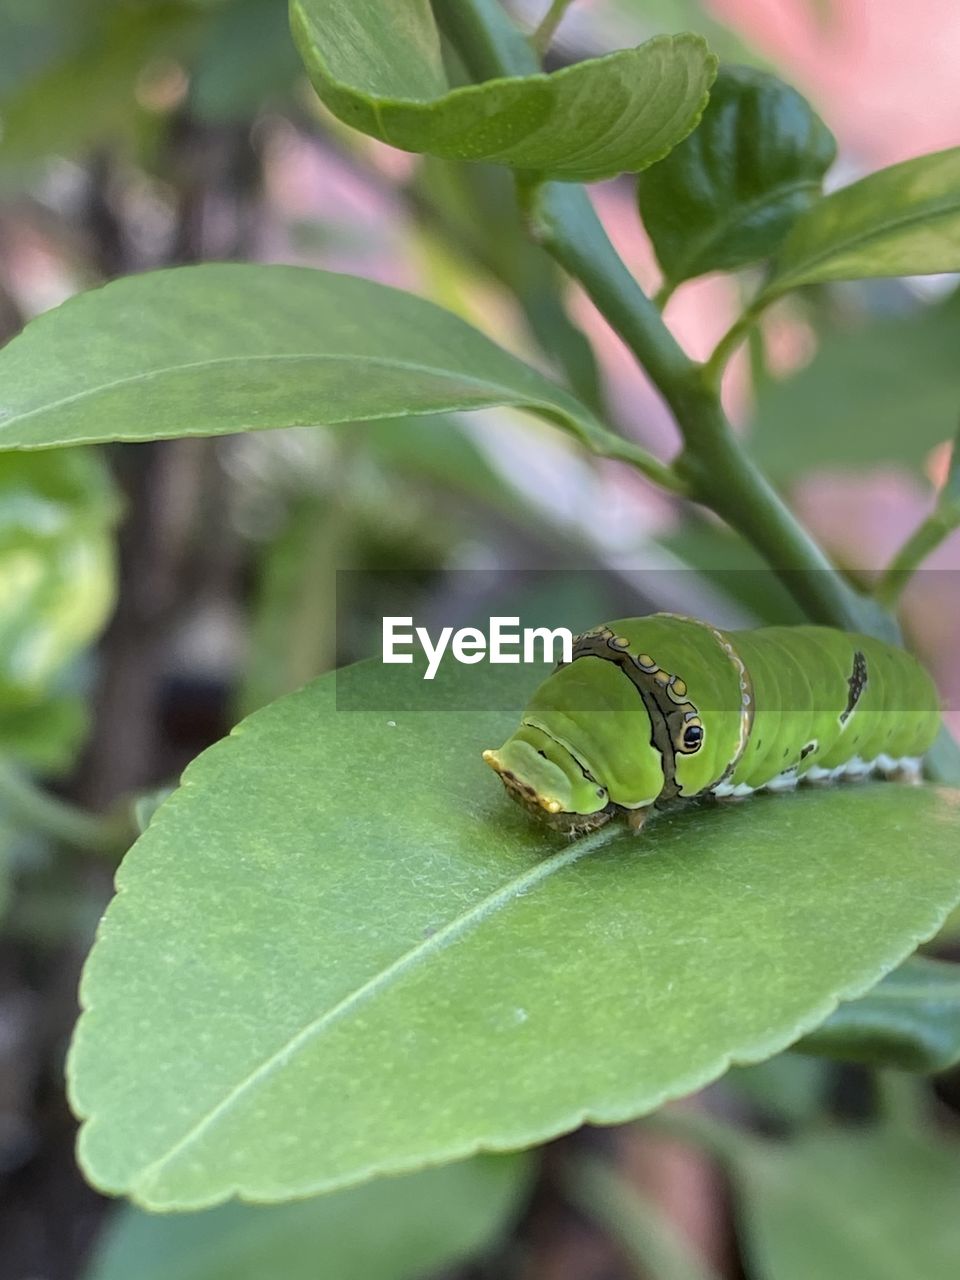 plant part, leaf, animal themes, animal, animal wildlife, plant, wildlife, green, one animal, insect, nature, close-up, no people, produce, flower, outdoors, tree, focus on foreground, day, beauty in nature, ant, growth, environment, macro photography, caterpillar, animal body part